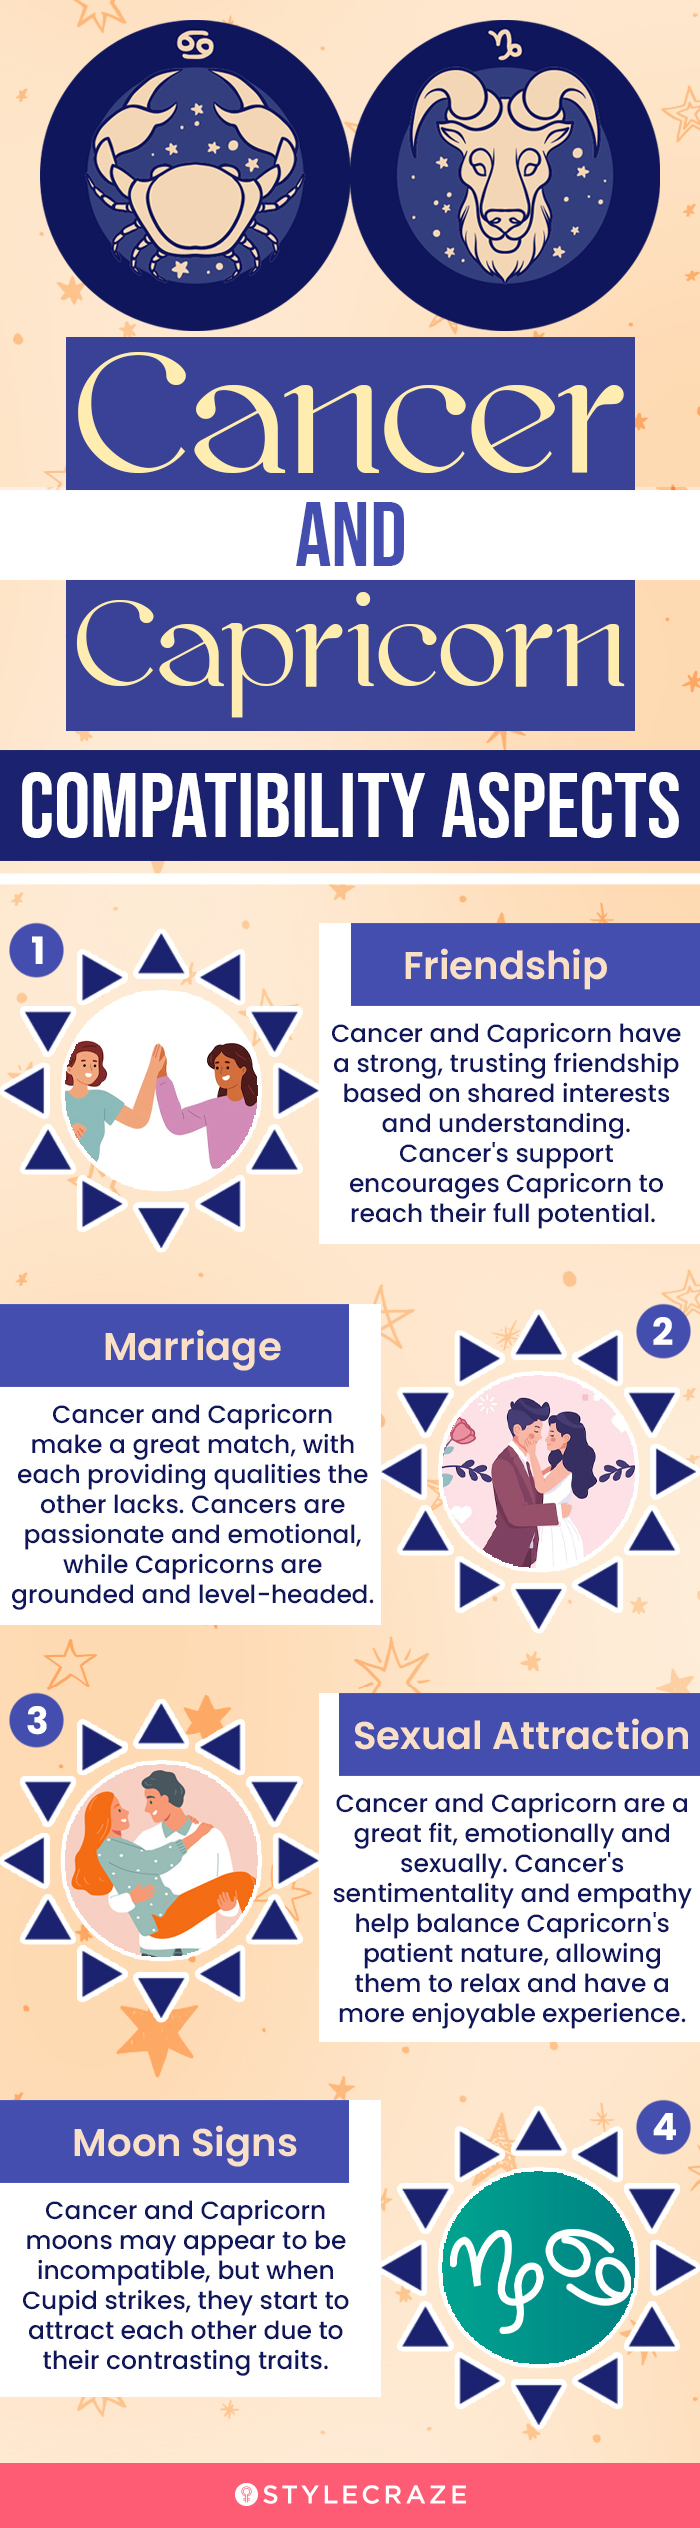 cancer and capricorn compatibility aspects [infographic]